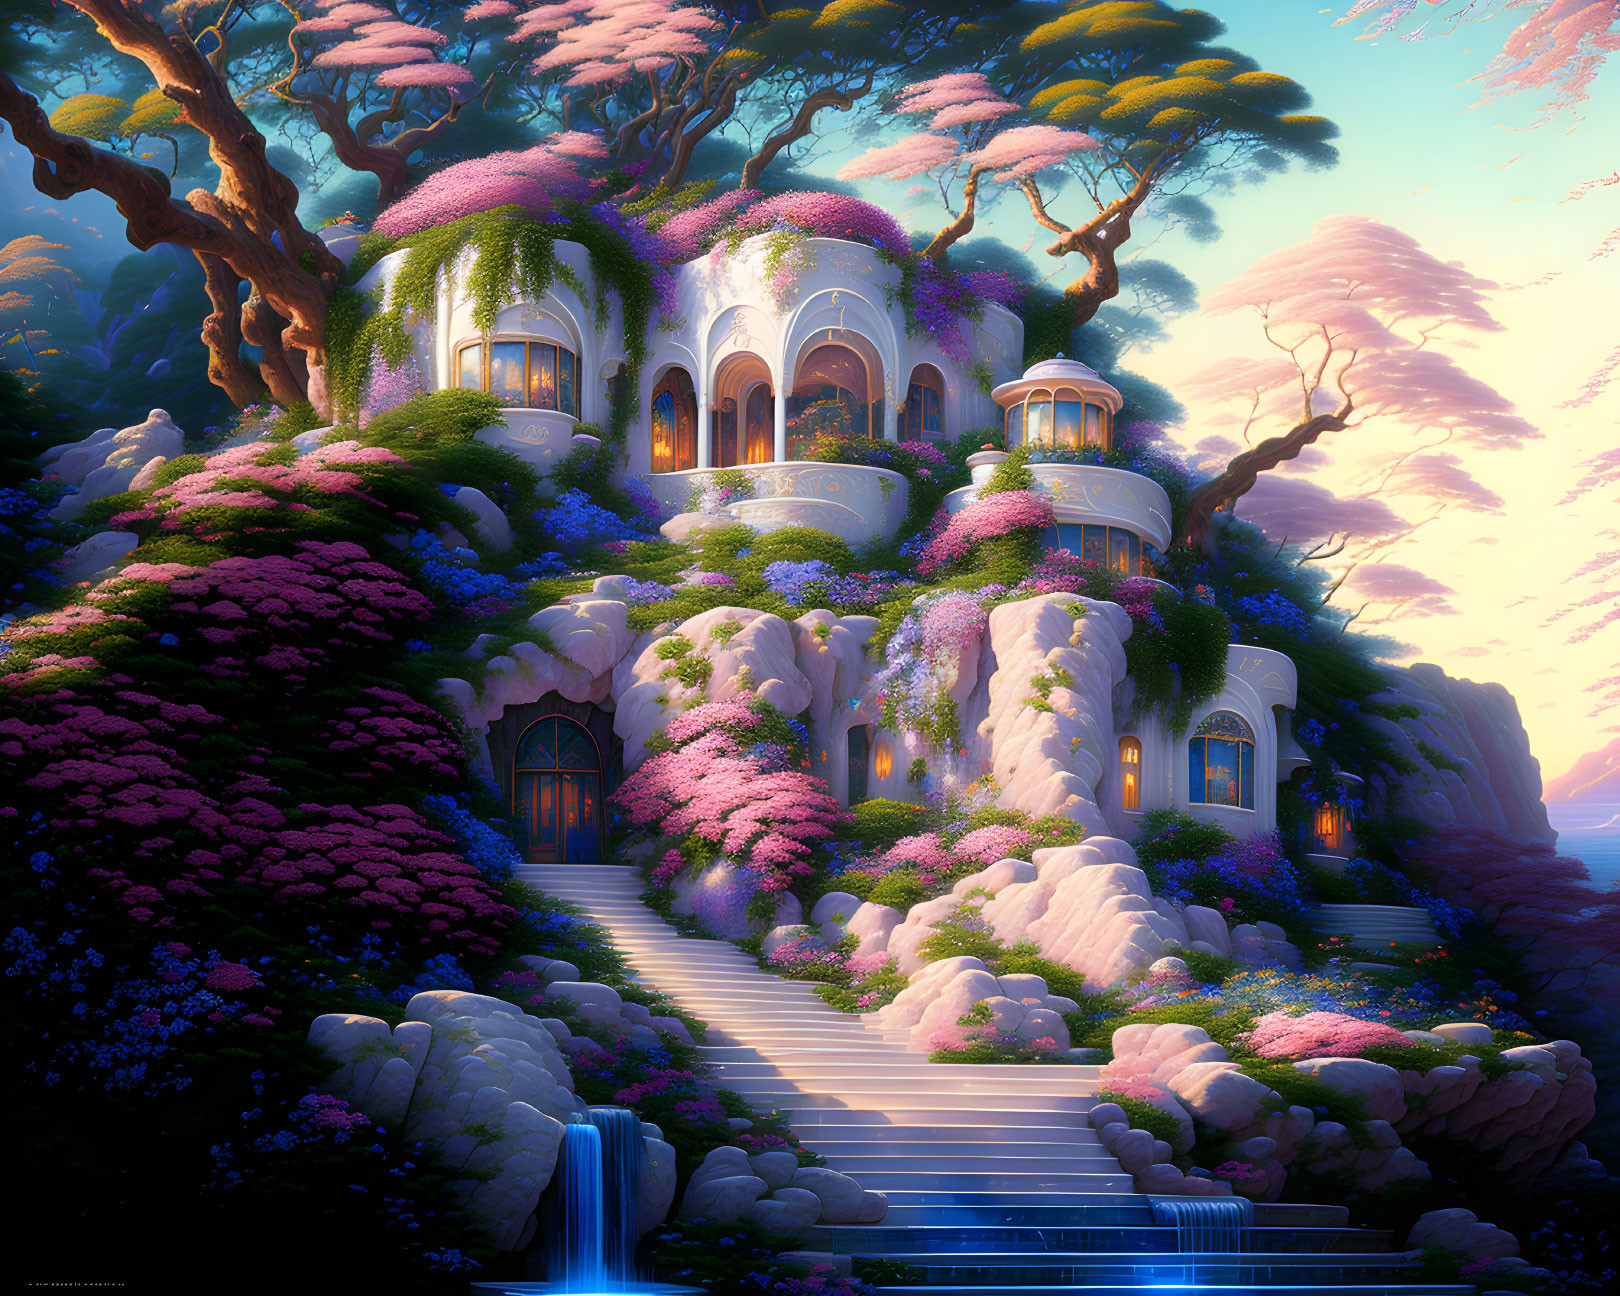 Colorful Fantasy Villa Surrounded by Blooming Flowers and Pink Foliage